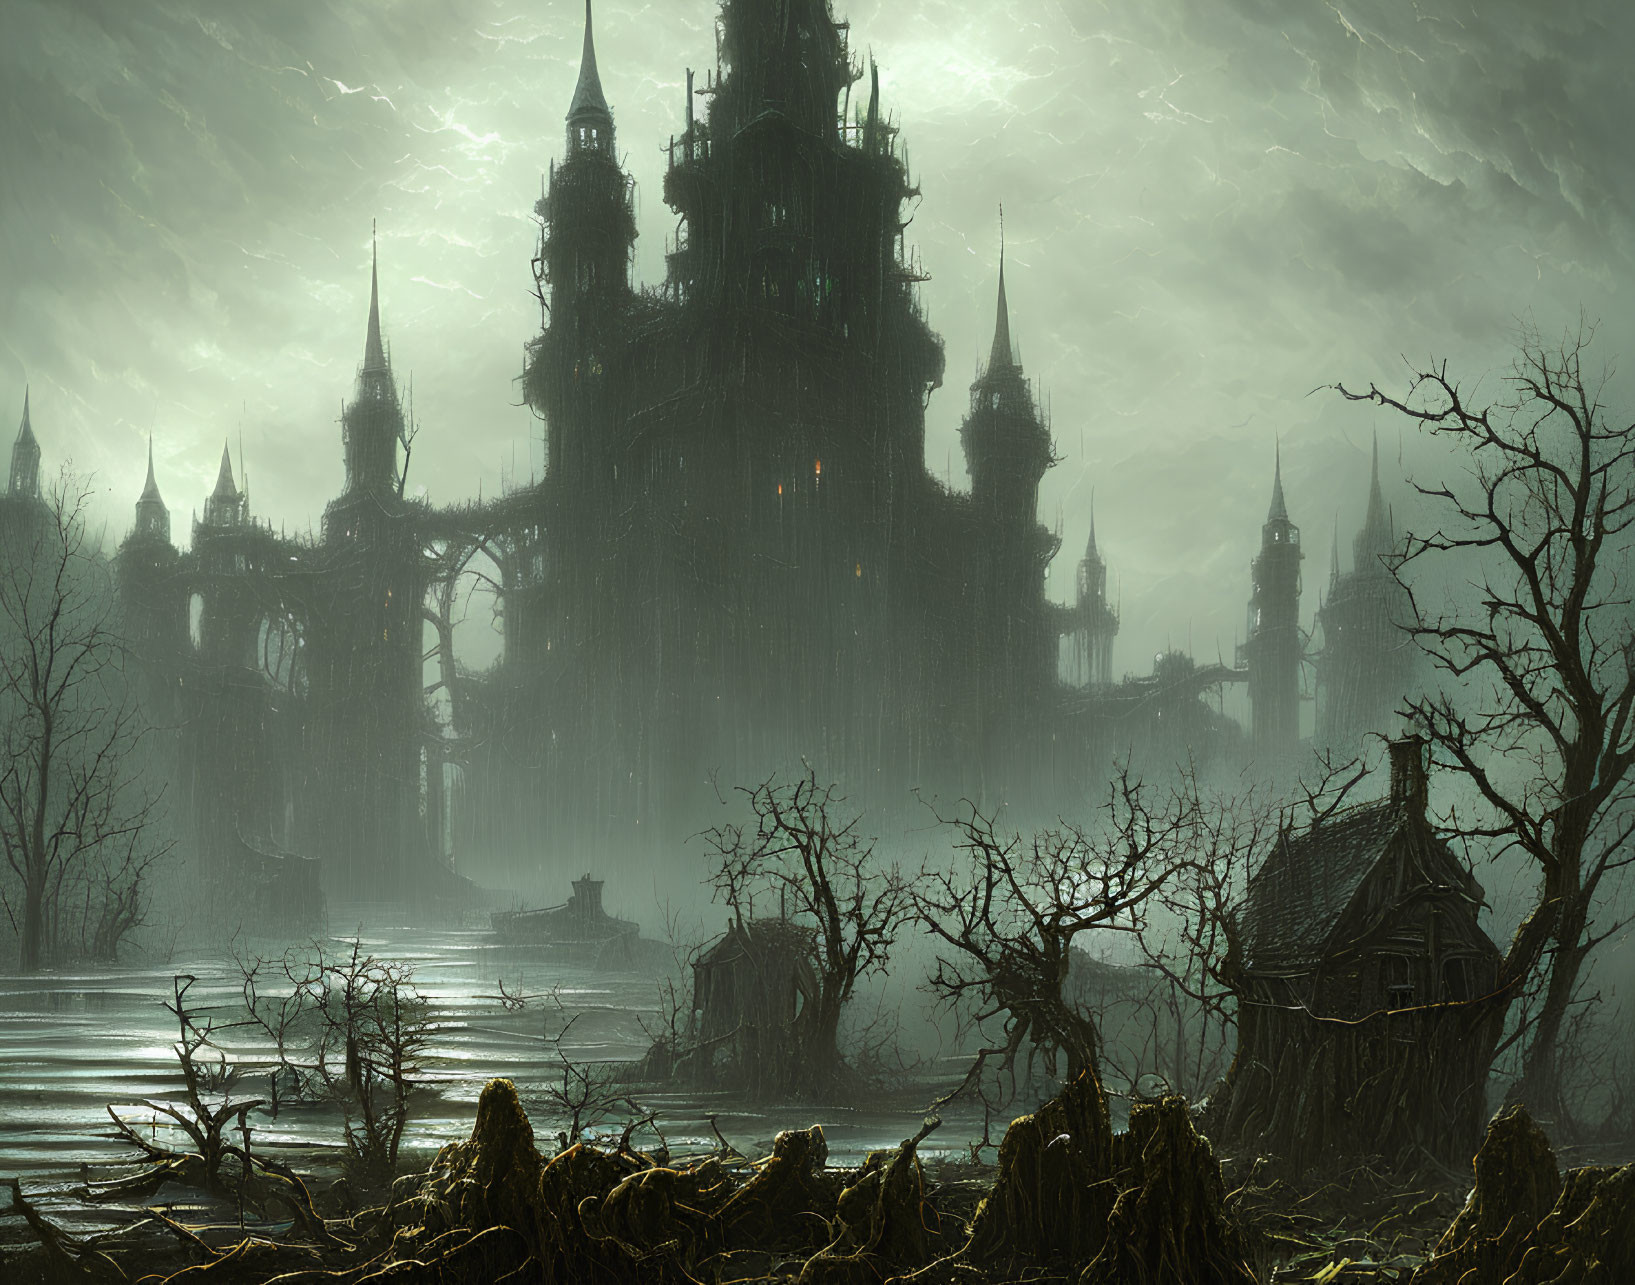 Gothic castle overlooking bleak stormy landscape with small hut amid twisted trees